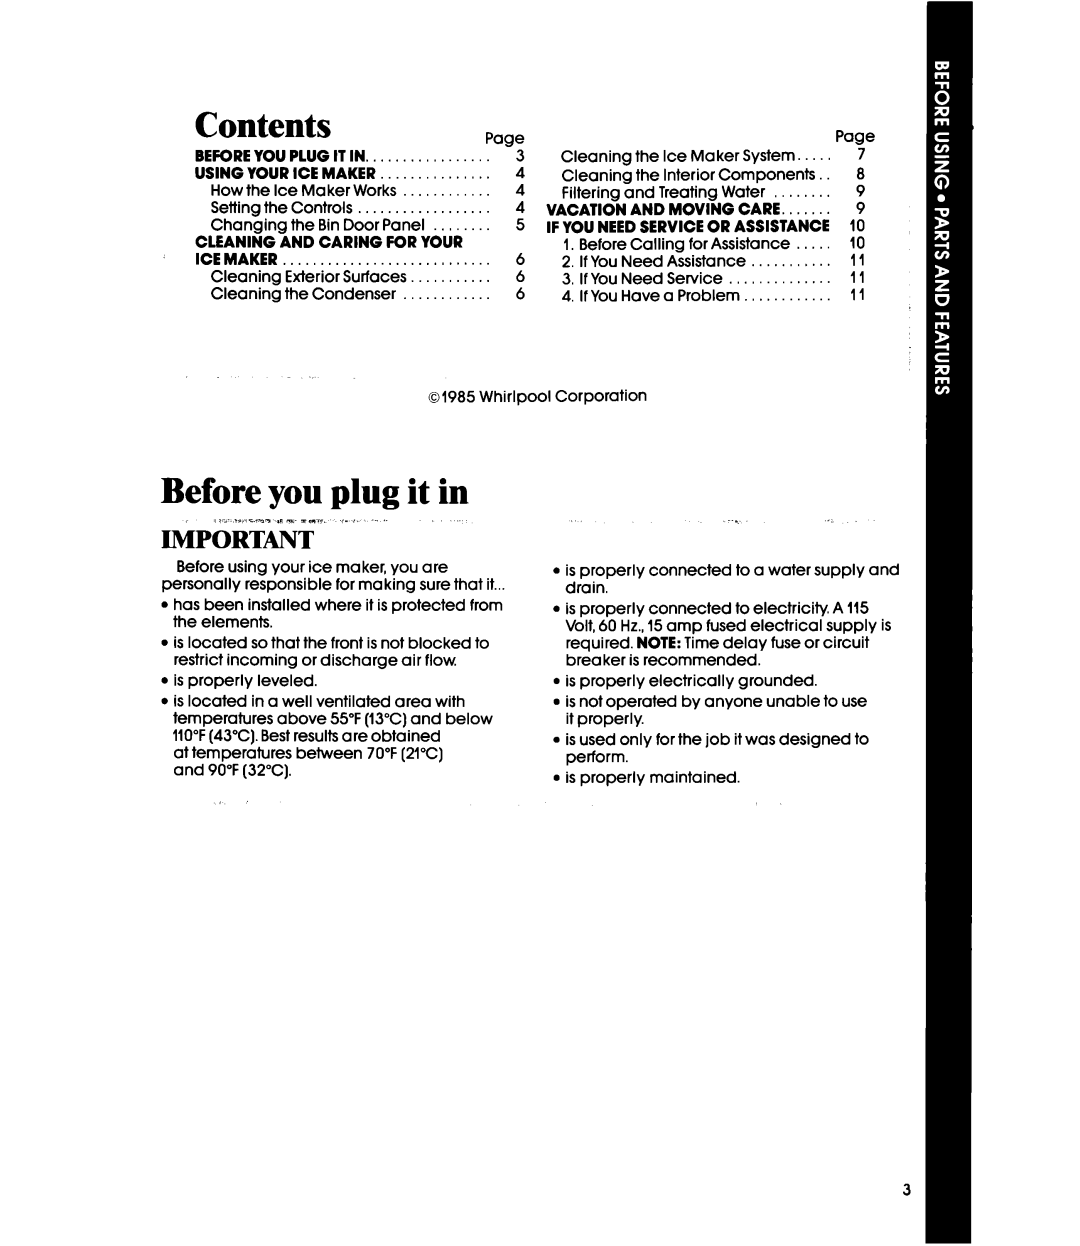 Whirlpool EC5100XP manual Contents, Before you plug it in 